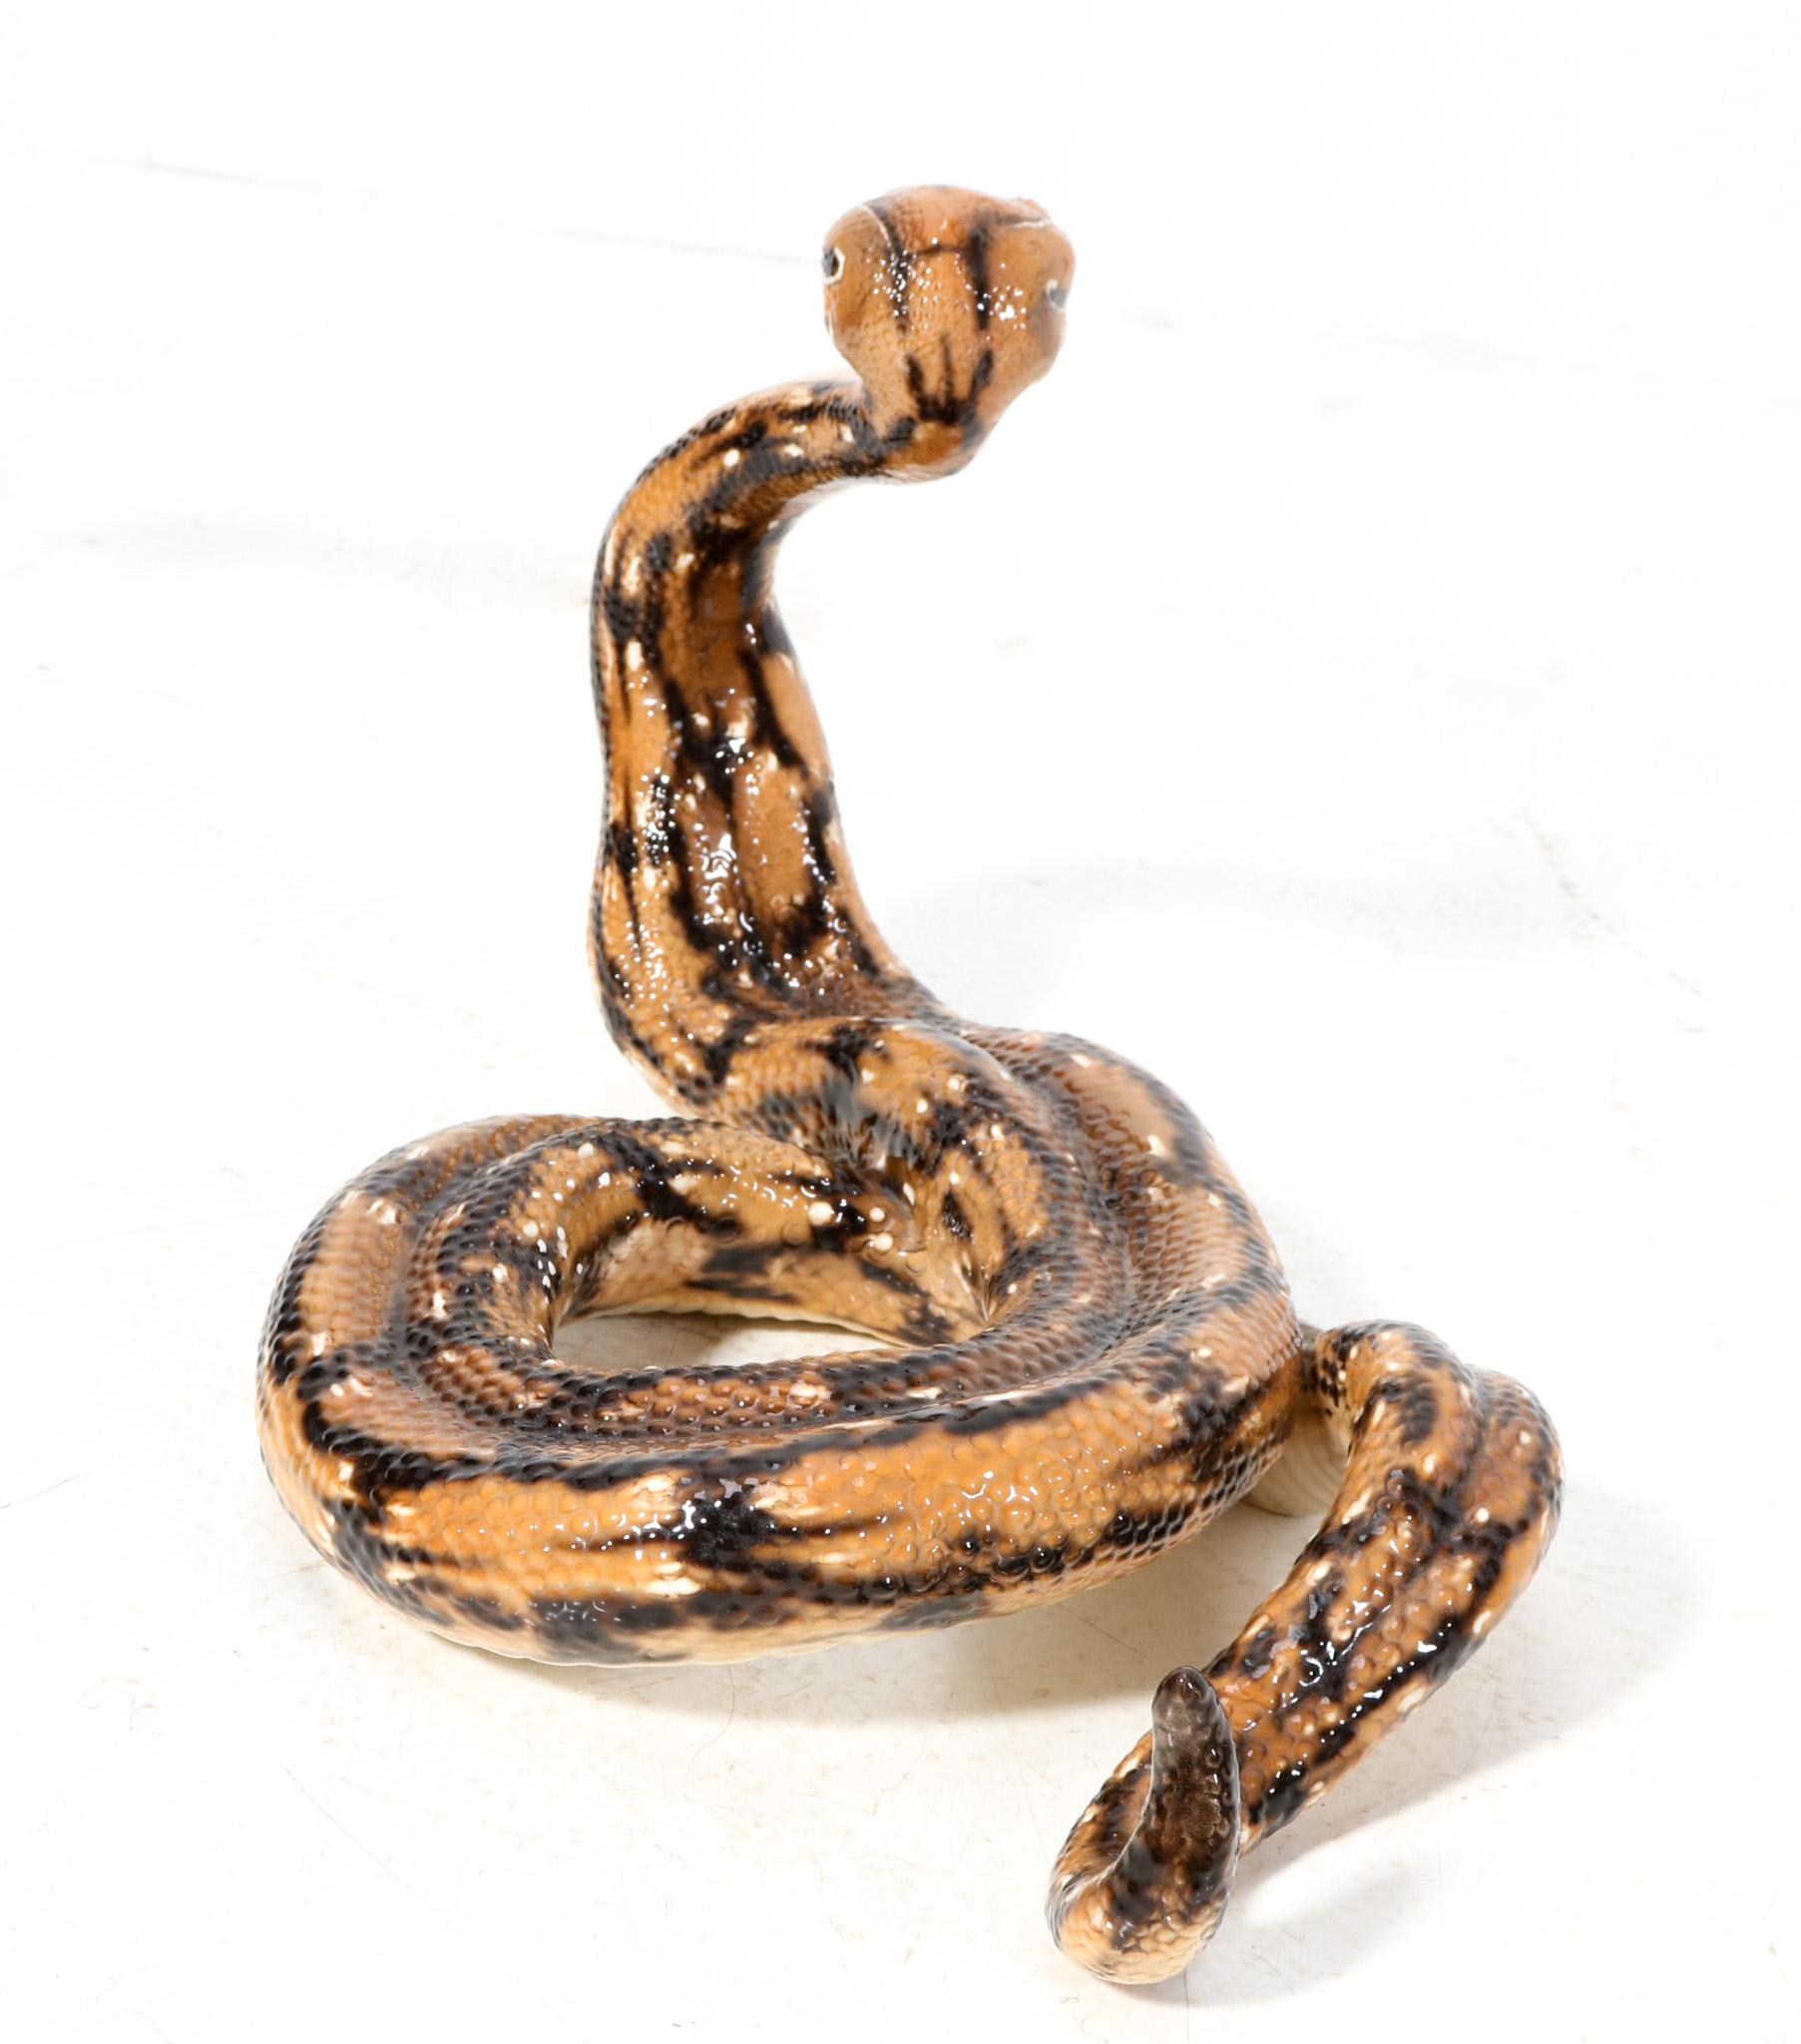  Mid-Century Modern Large Ceramic Rattle Snake by Ronzan Italy, 1950s 2